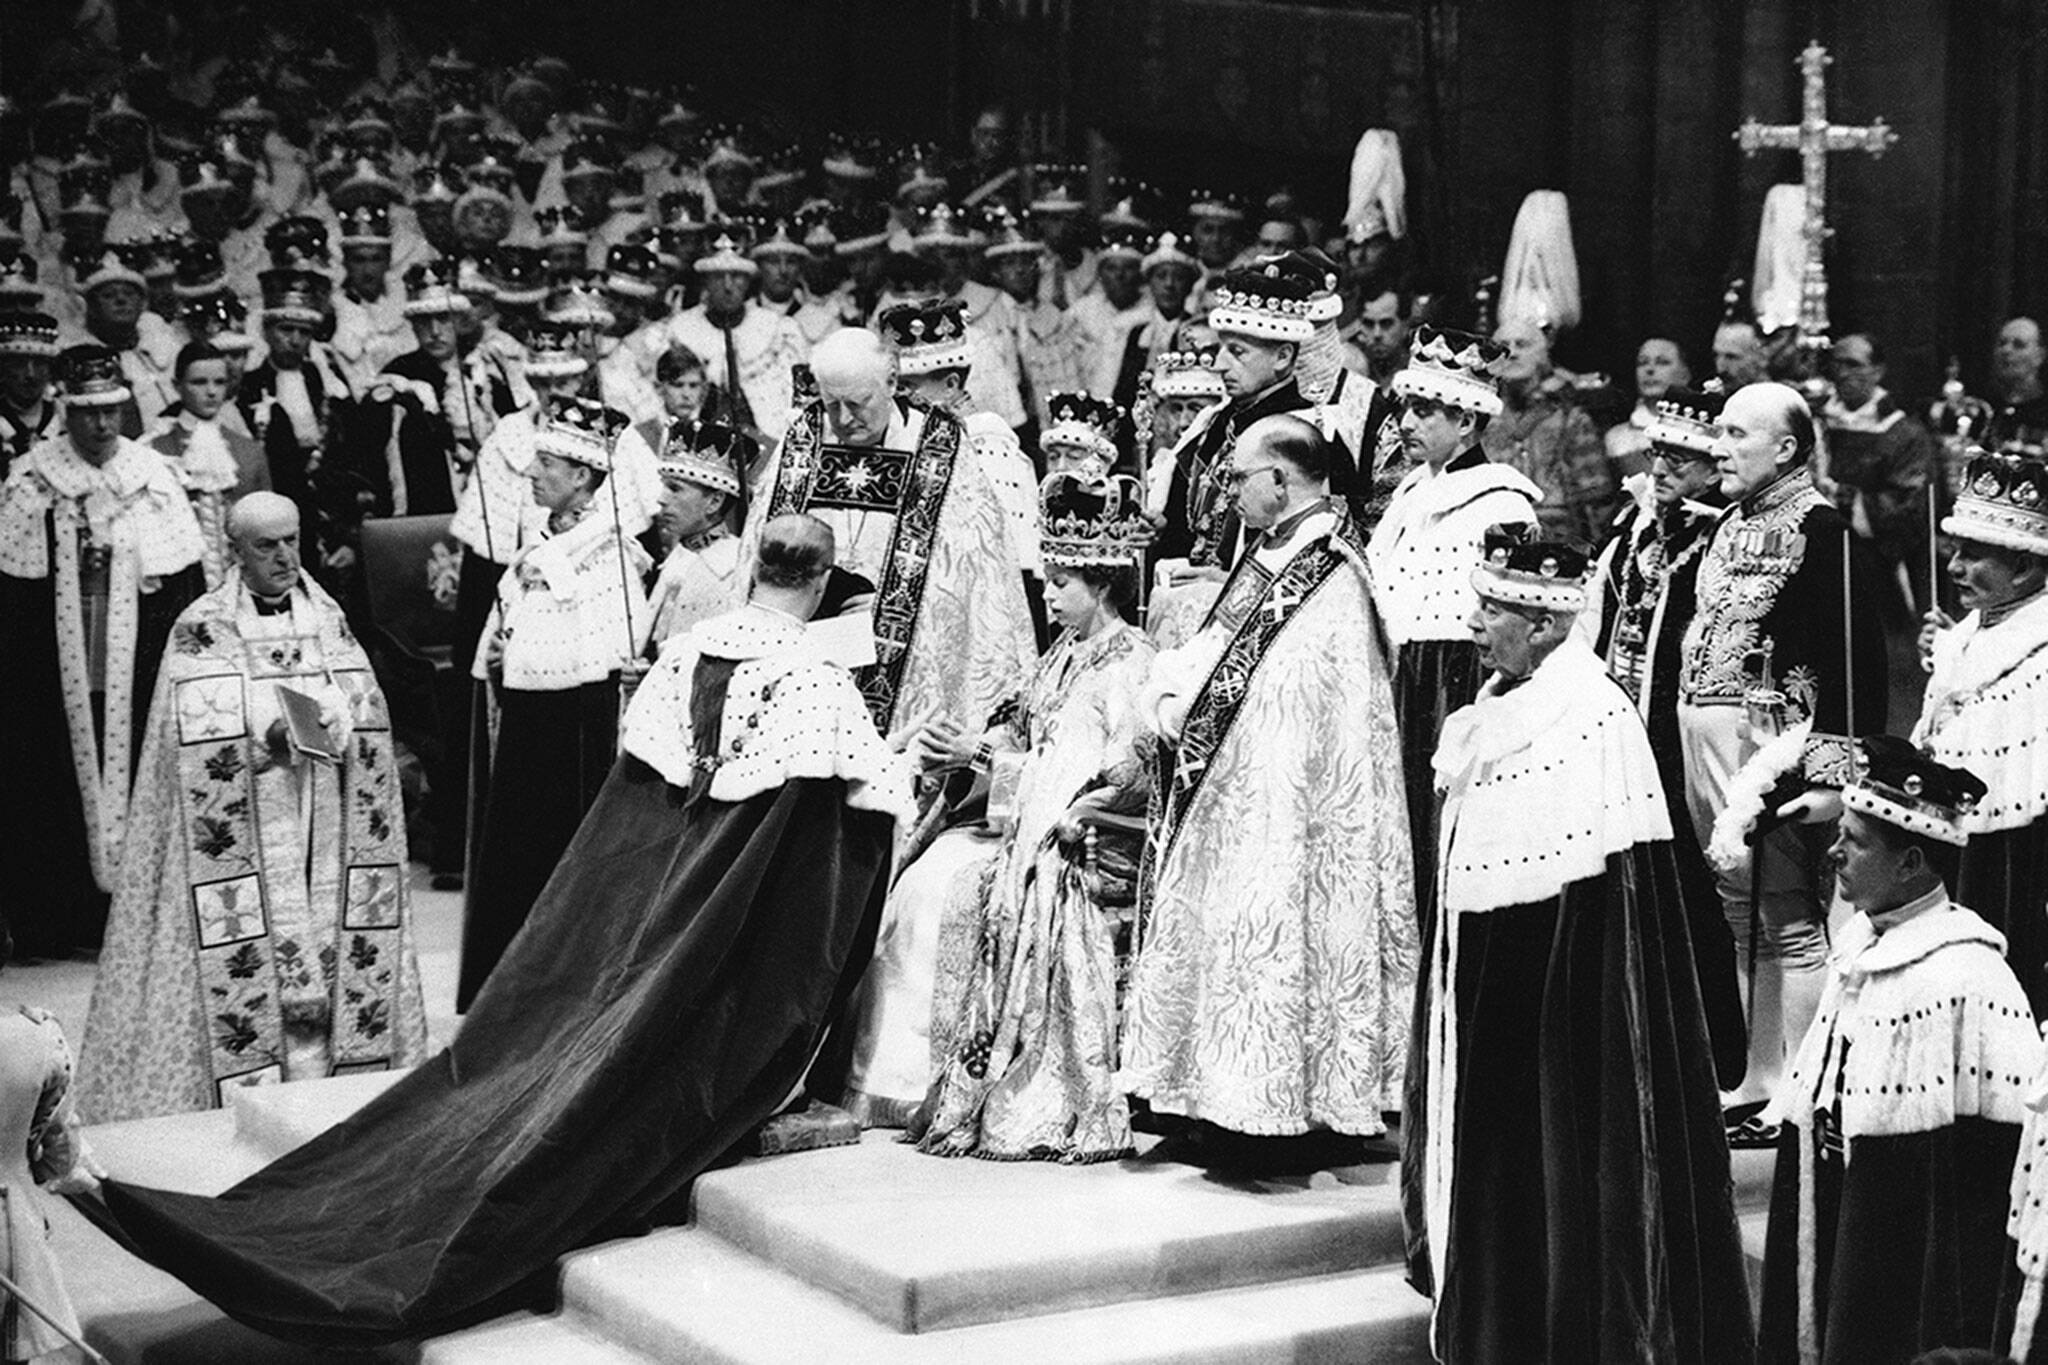 Surrounded by his clerics and ladies-in-waiting, Queen Elizabeth II sits in the Chair of Estate in Westminster Abbey, London on June 2, 1953, before being crowned. In royal gallery in background, Queen mother Elizabeth is leaning over to attend to the unseen little Prince Charles. Princess Margaret also lends a hand. Duchess of Gloucester may be seen at right in royal gallery. (AP Photo)